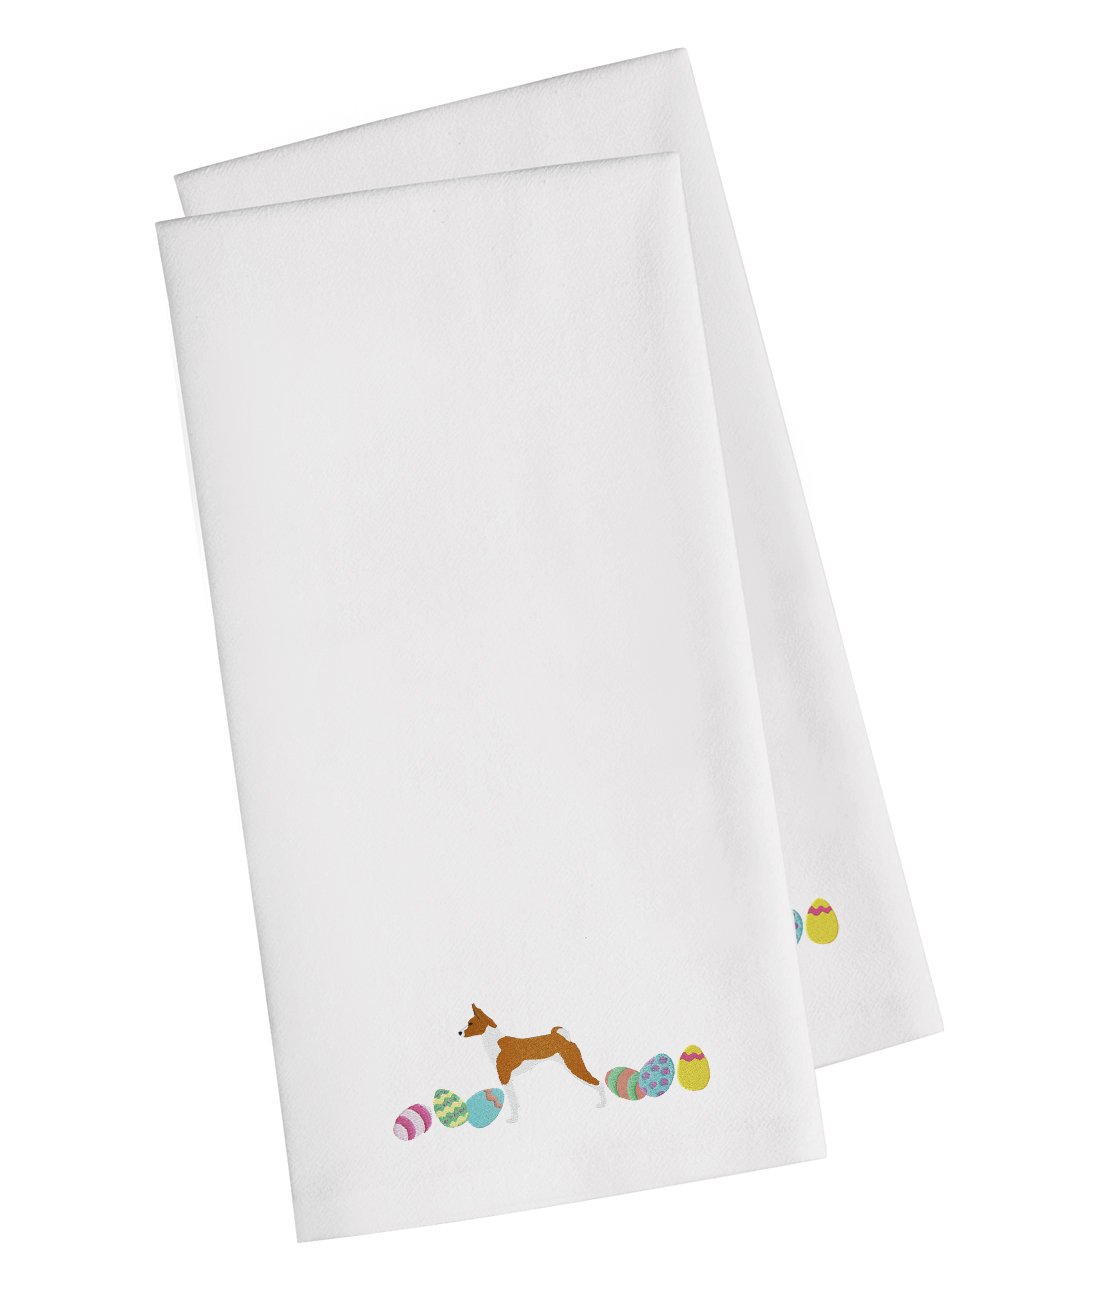 Basenji Easter White Embroidered Kitchen Towel Set of 2 CK1602WHTWE by Caroline's Treasures